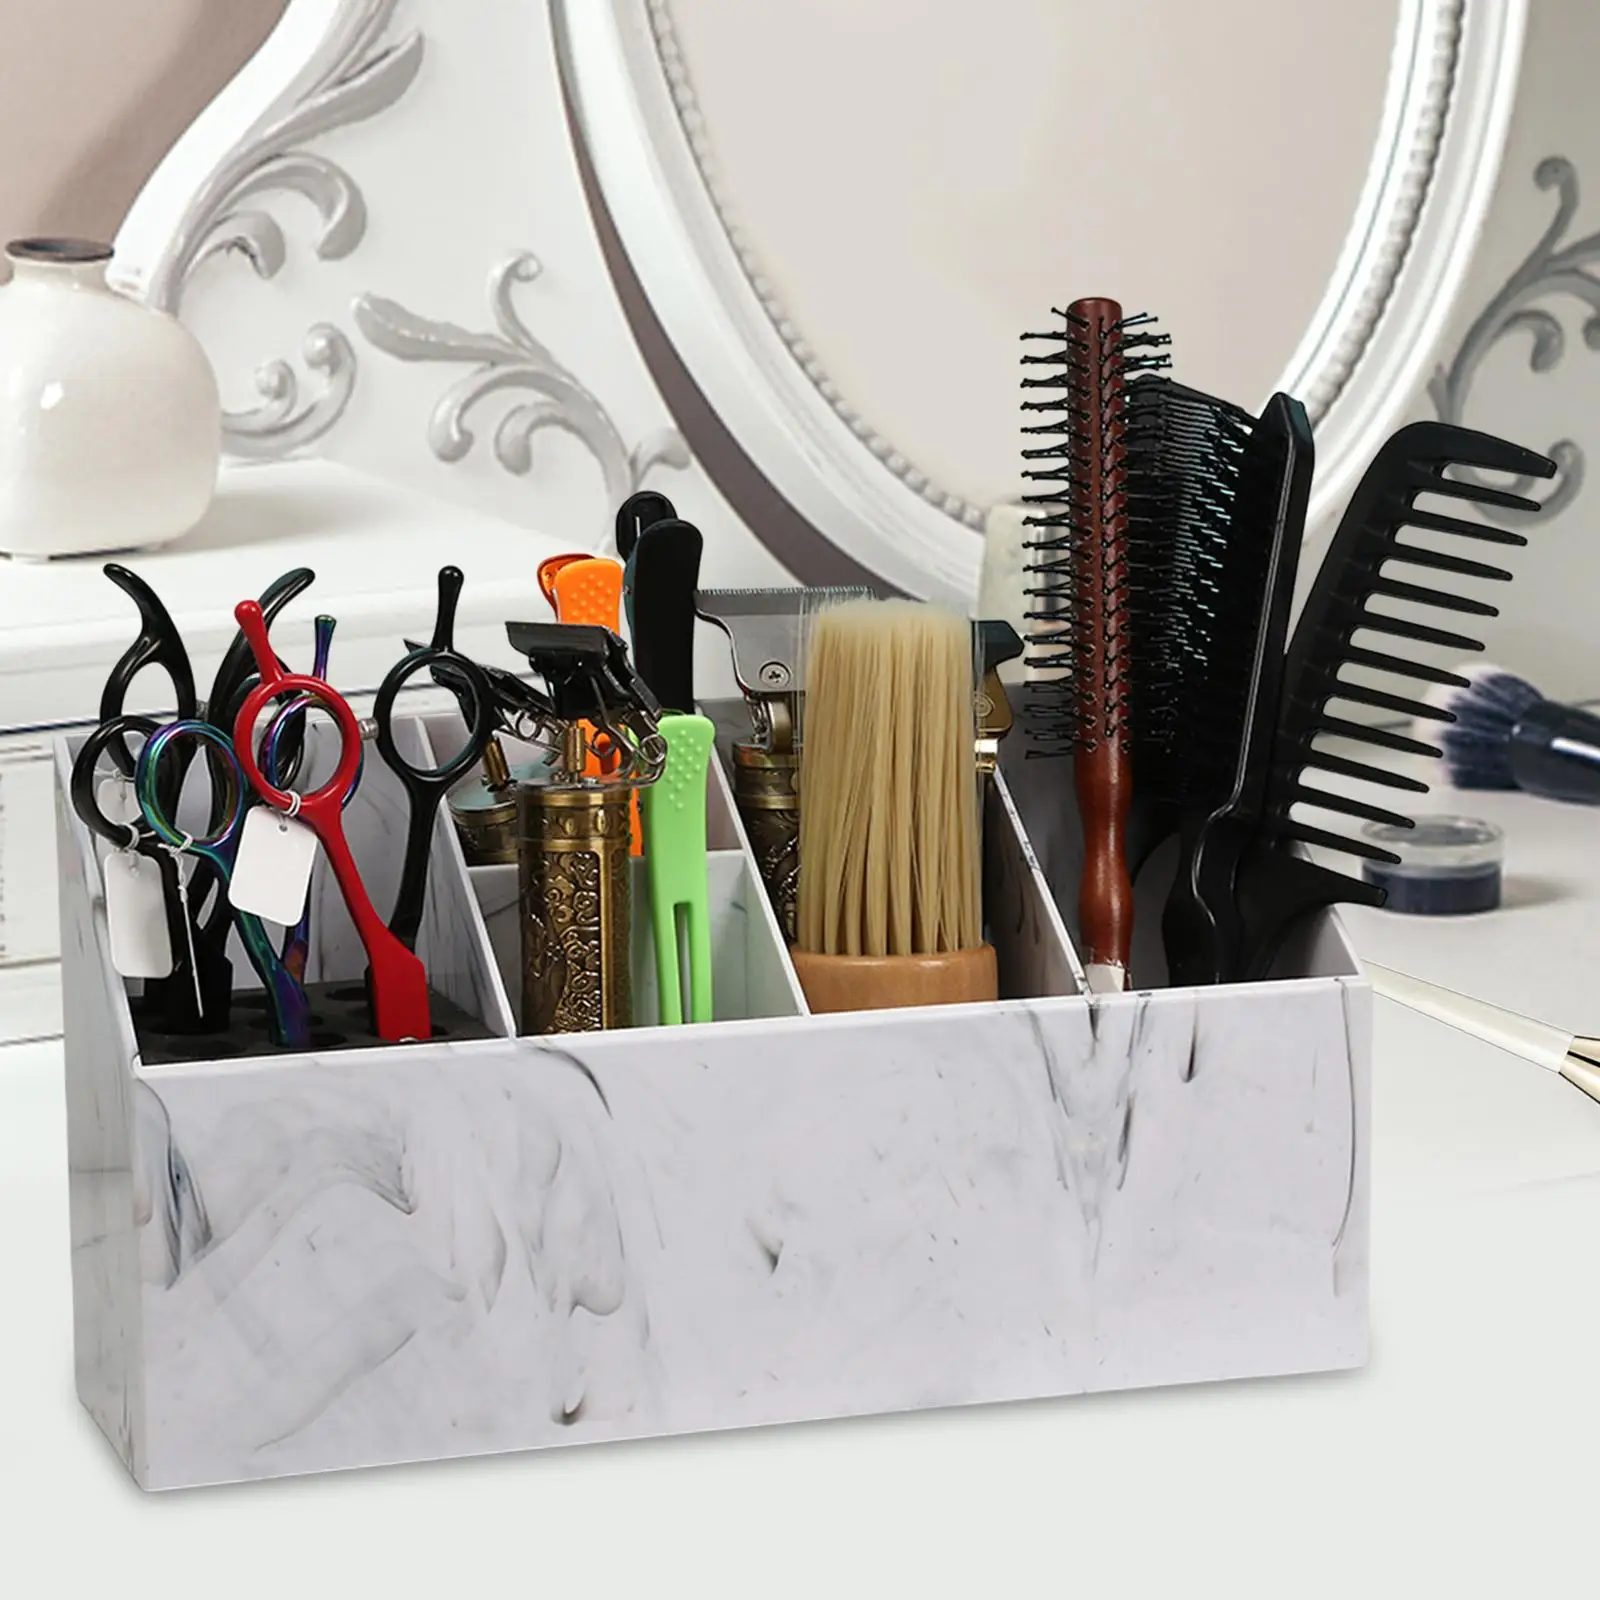 Barber Scissors Holder Box Brushes Storage Rack Barber Shear Holder Box for Brushes Hairstyling Combs Clips Hairdressers